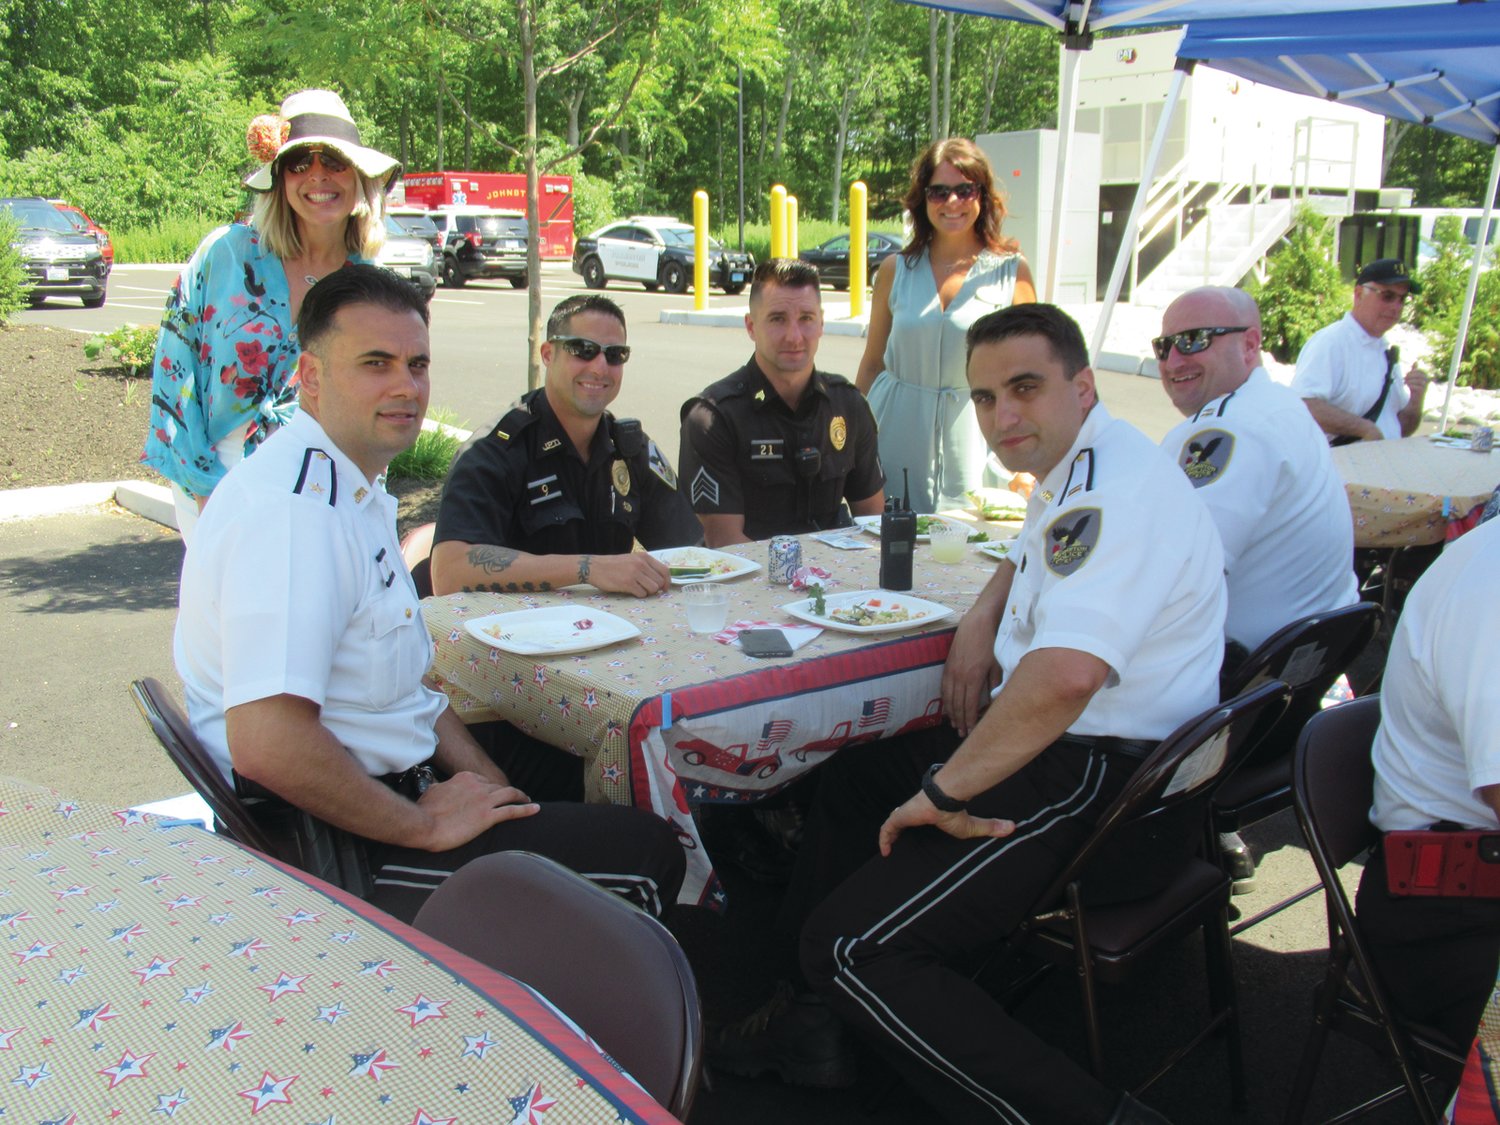 FIRST FORCE: Briarcliffe leaders Stefany Reed and Jen Burns join members of the Johnston Police Department during Monday’s extraordinary First Responders Luncheon-Cookout at recently opened Preserve.